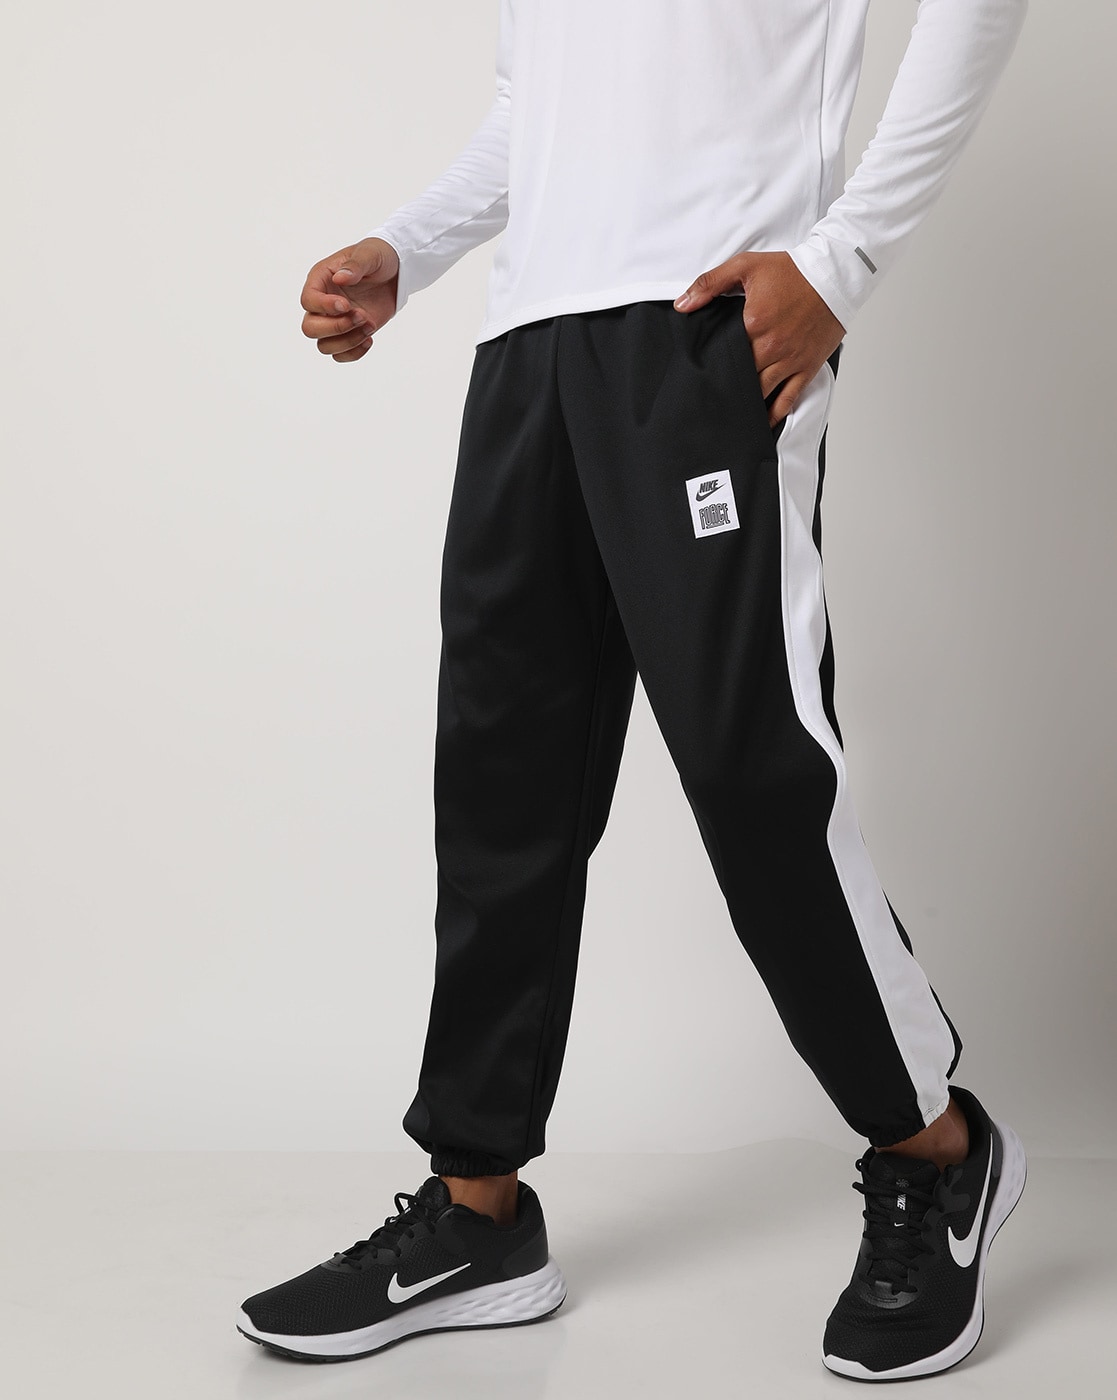 Nike Air Max Track Pants  New With Tags  Size Medium  120  eBay